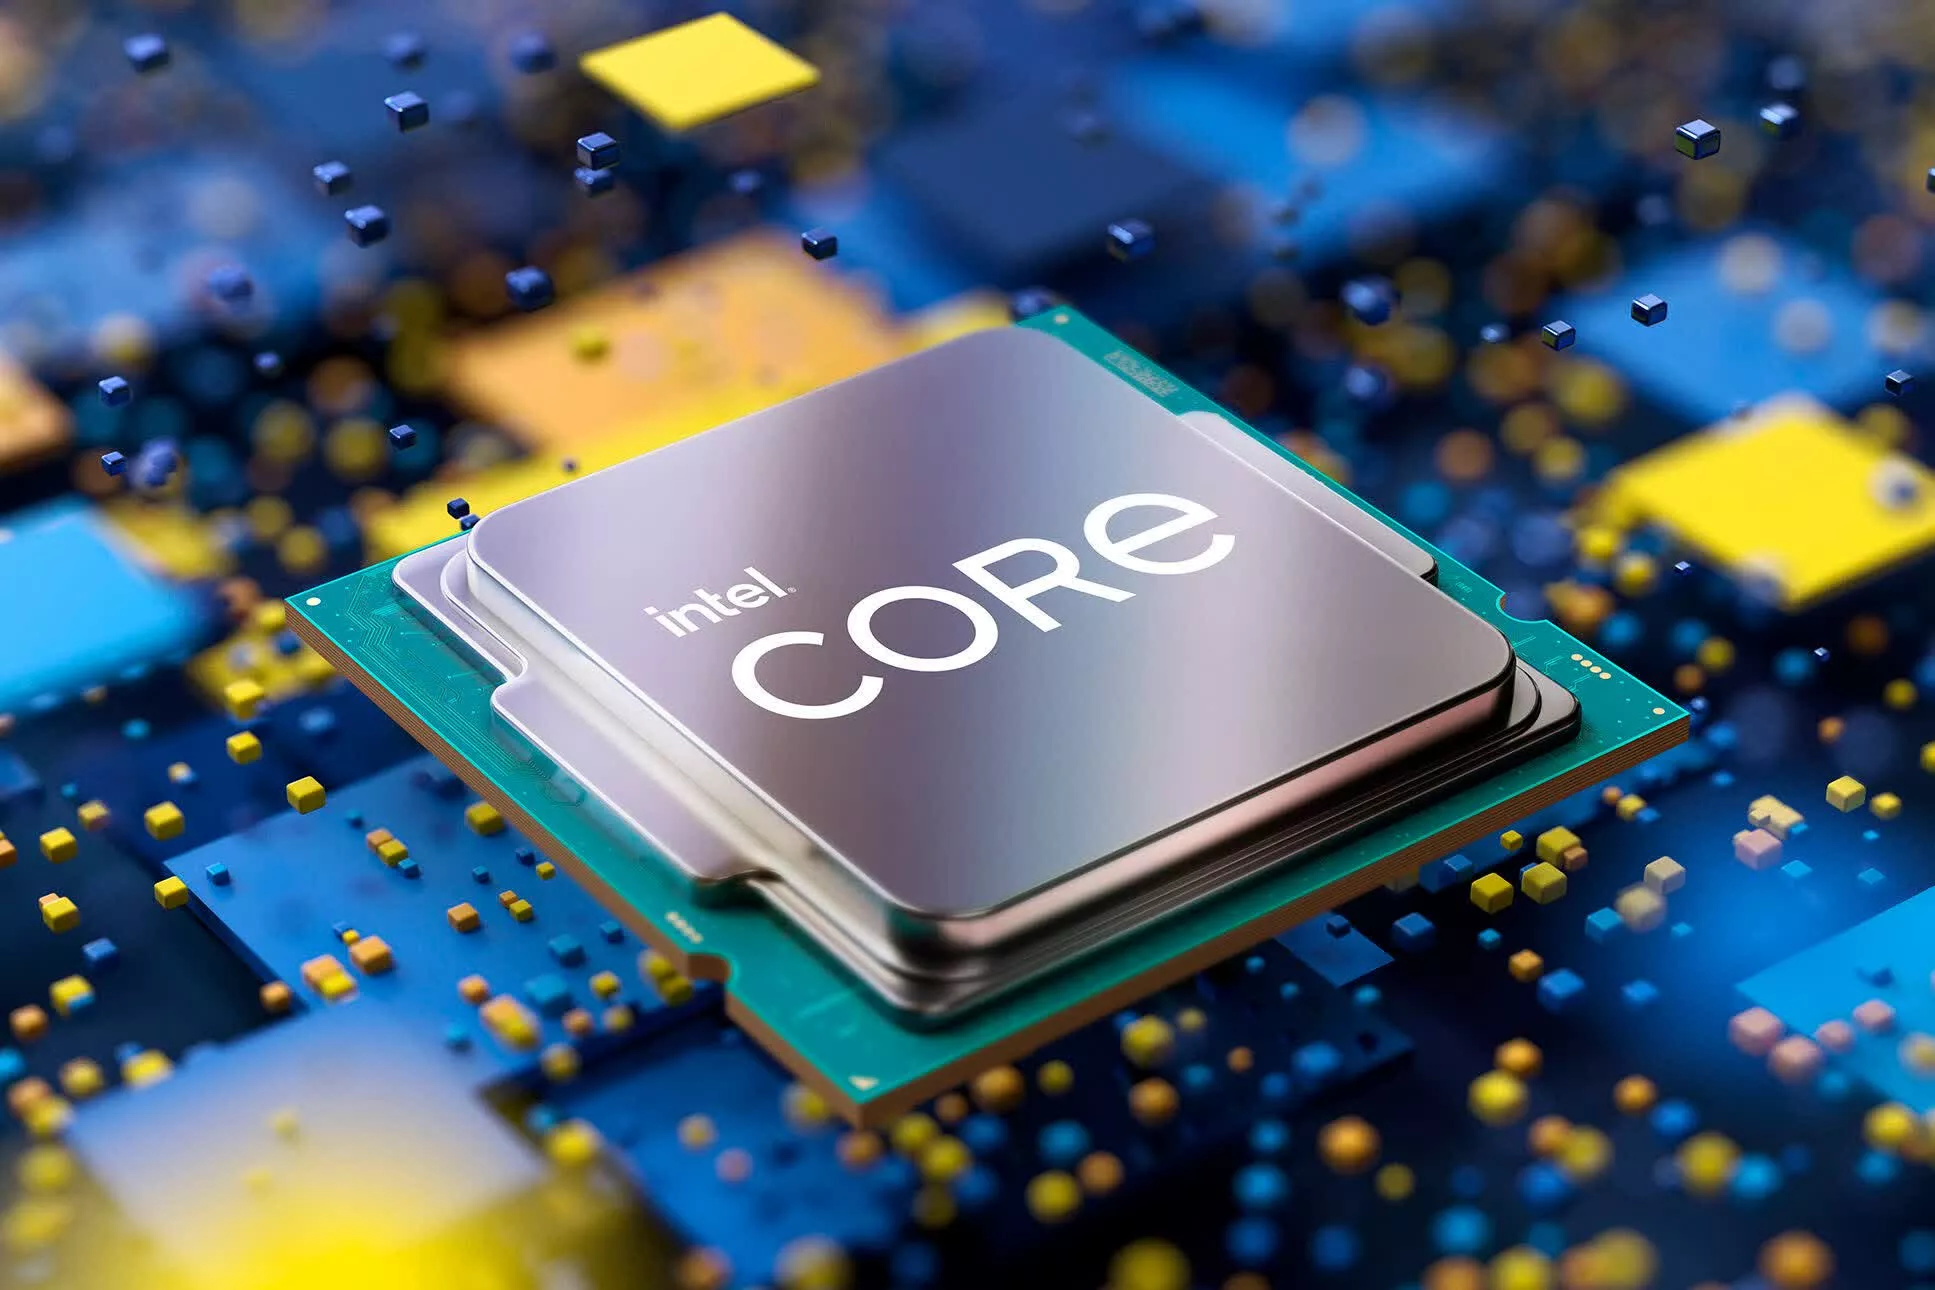 Affordable Intel Alder Lake chips may be coming soon, according to retail leak